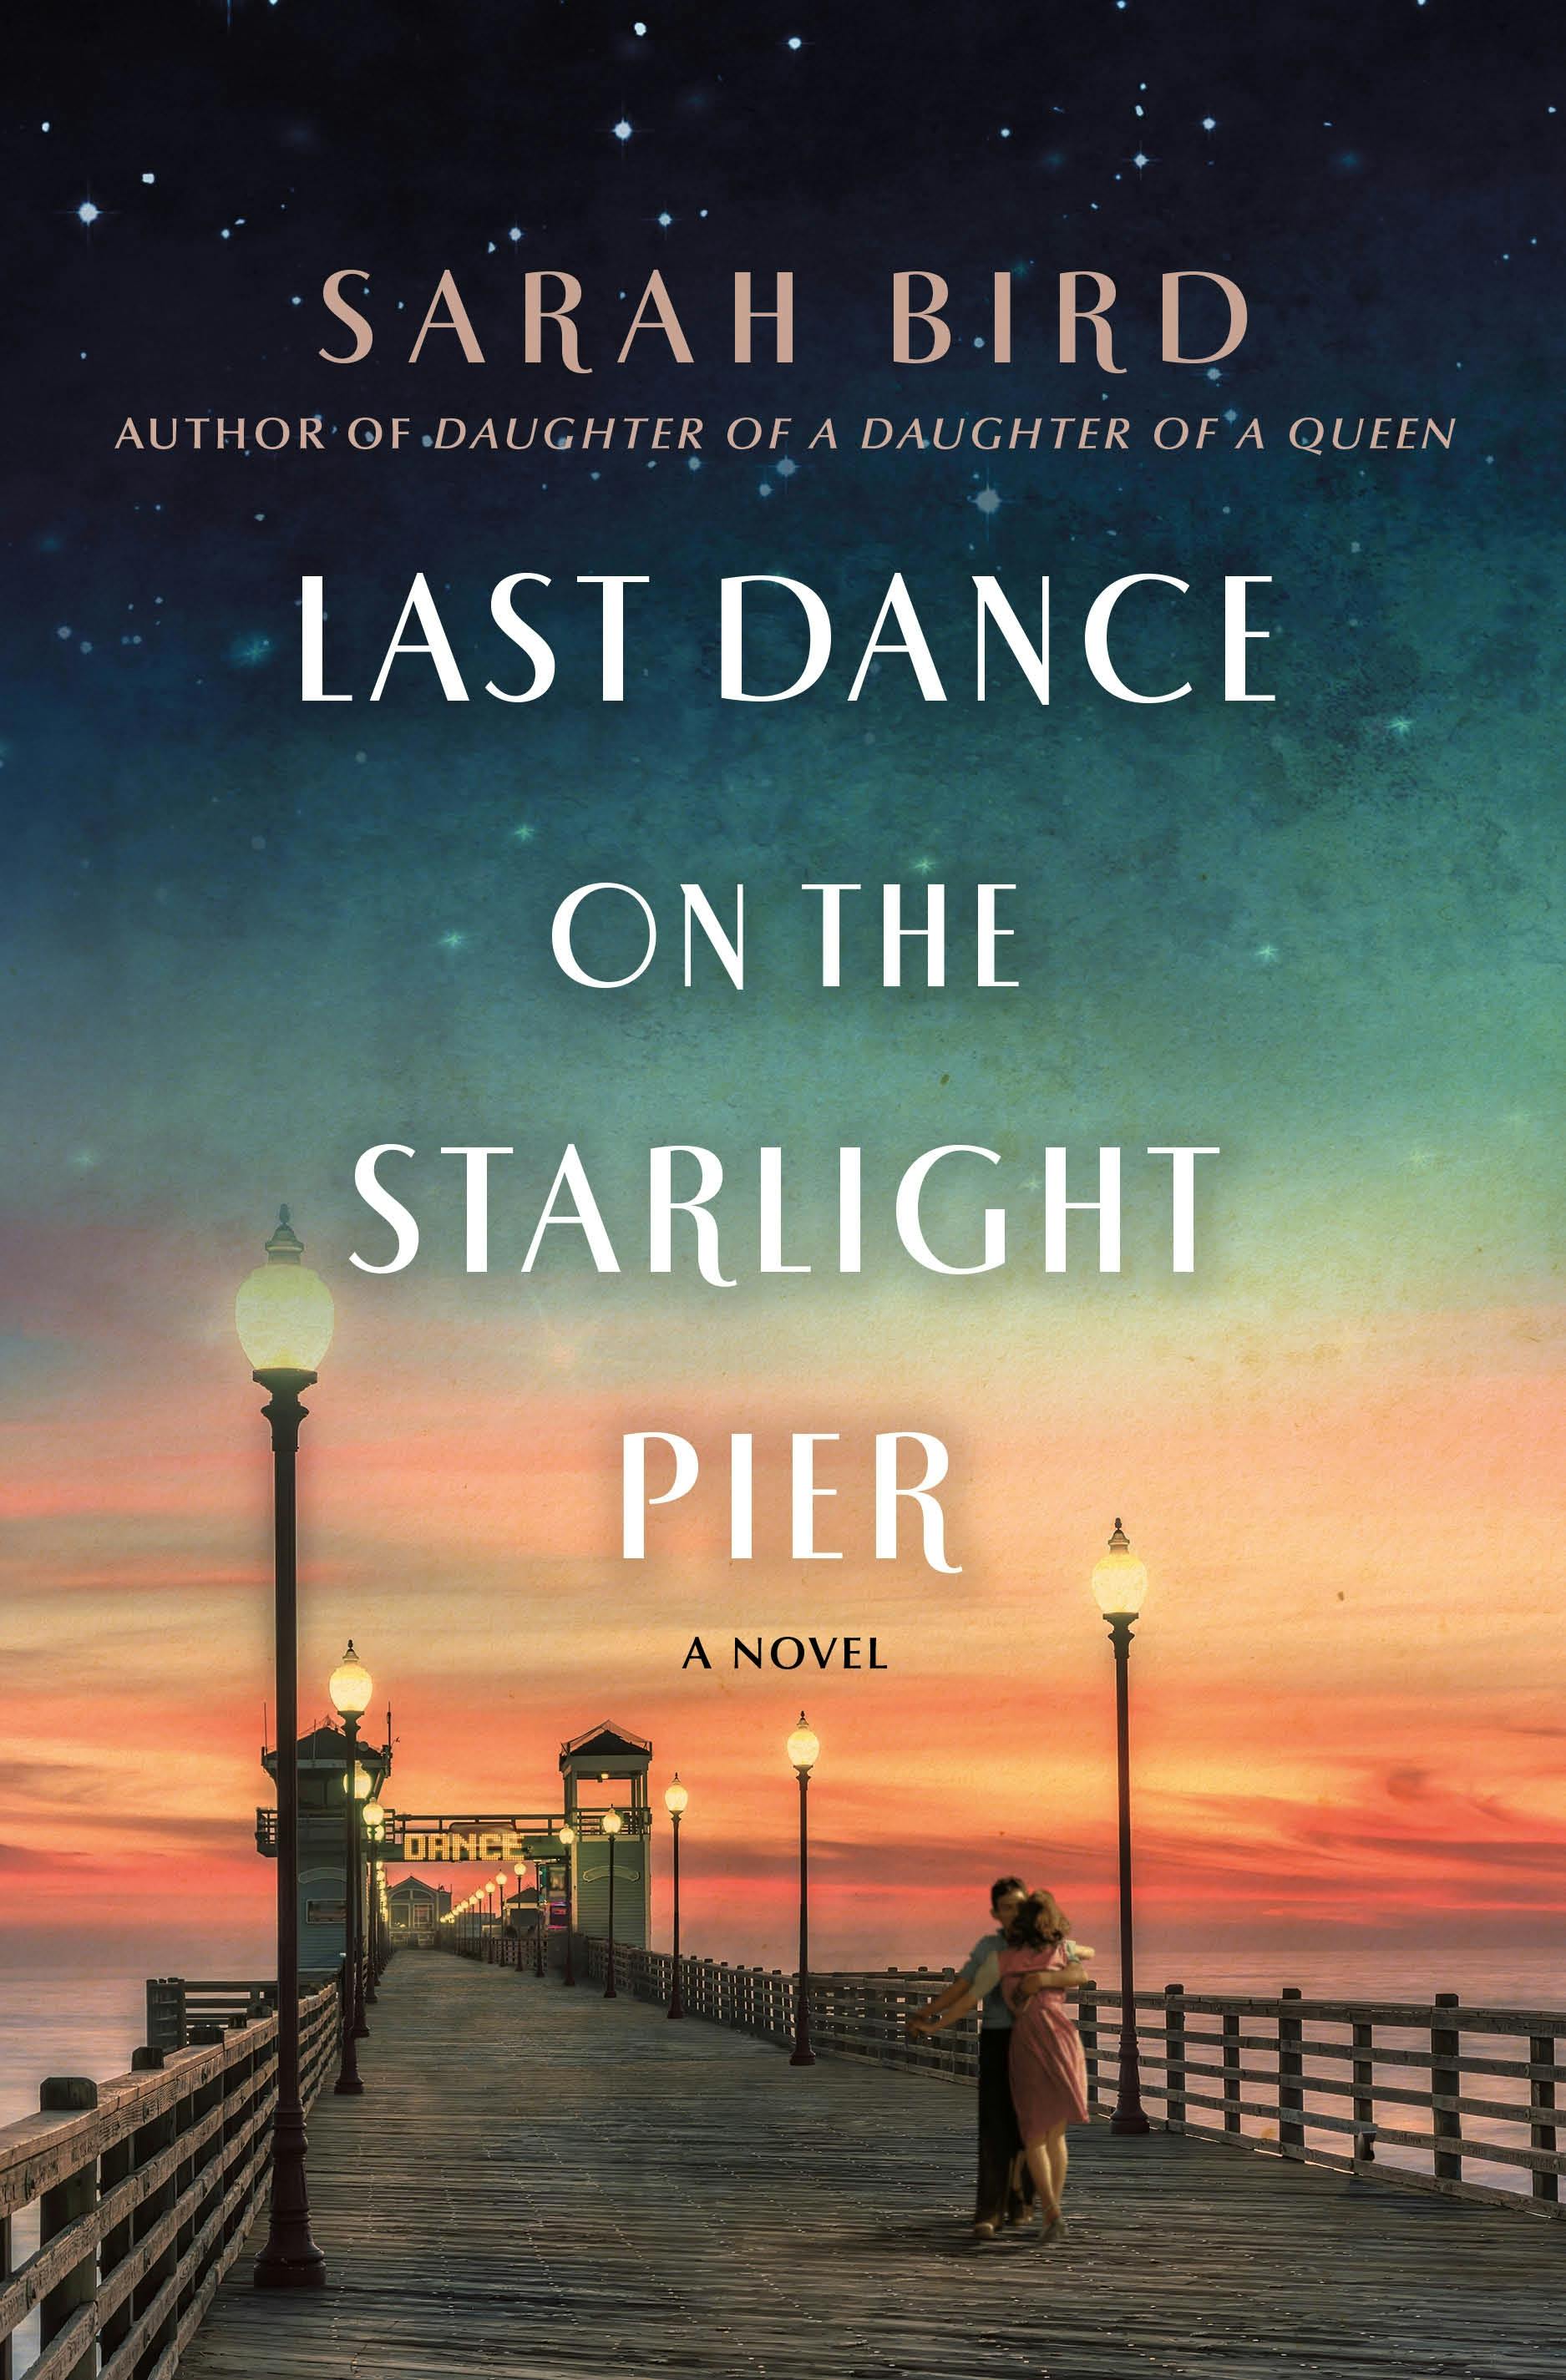 Adult Saturday Afternoon Book Club: Last Dance on the Starlight Pier